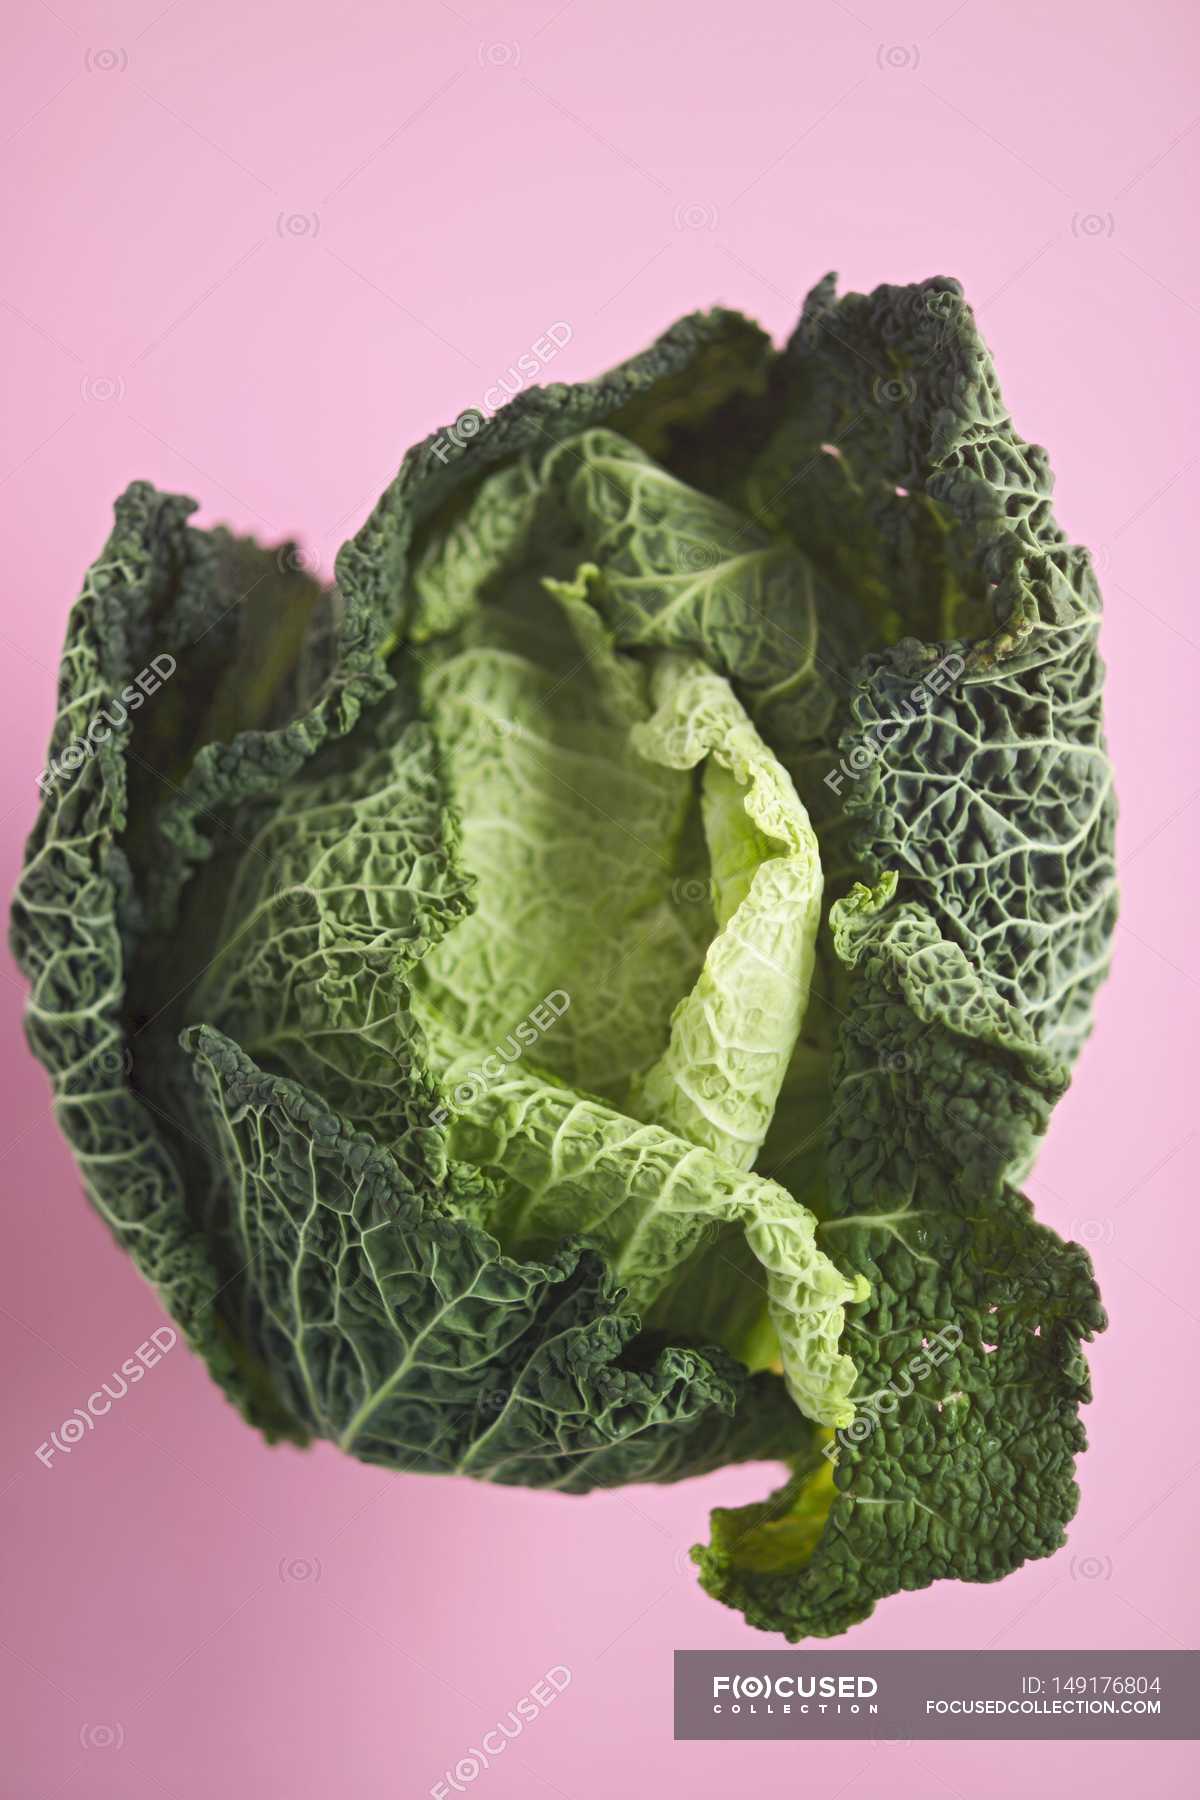 Green savoy cabbage — delicious, background - Stock Photo | #149176804